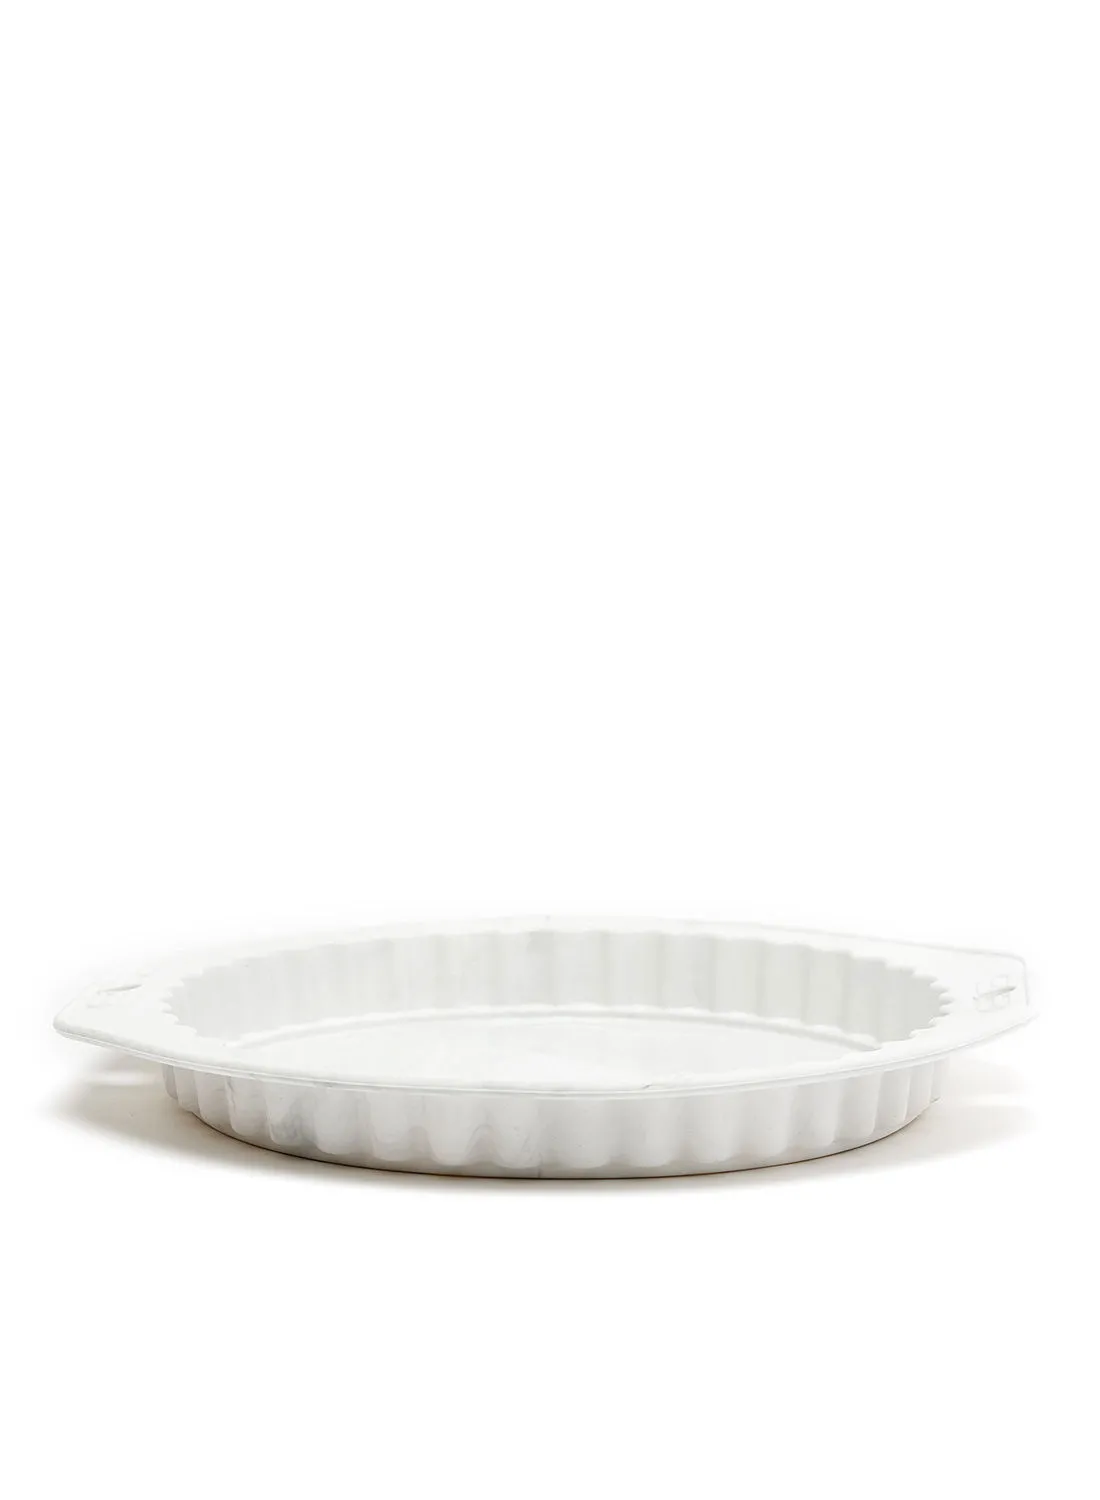 noon east Oven Pan - Made Of Silicone - Pie 29 Cm - Baking Pan - Oven Trays - Cake Tray - Oven Pan - White/Marble